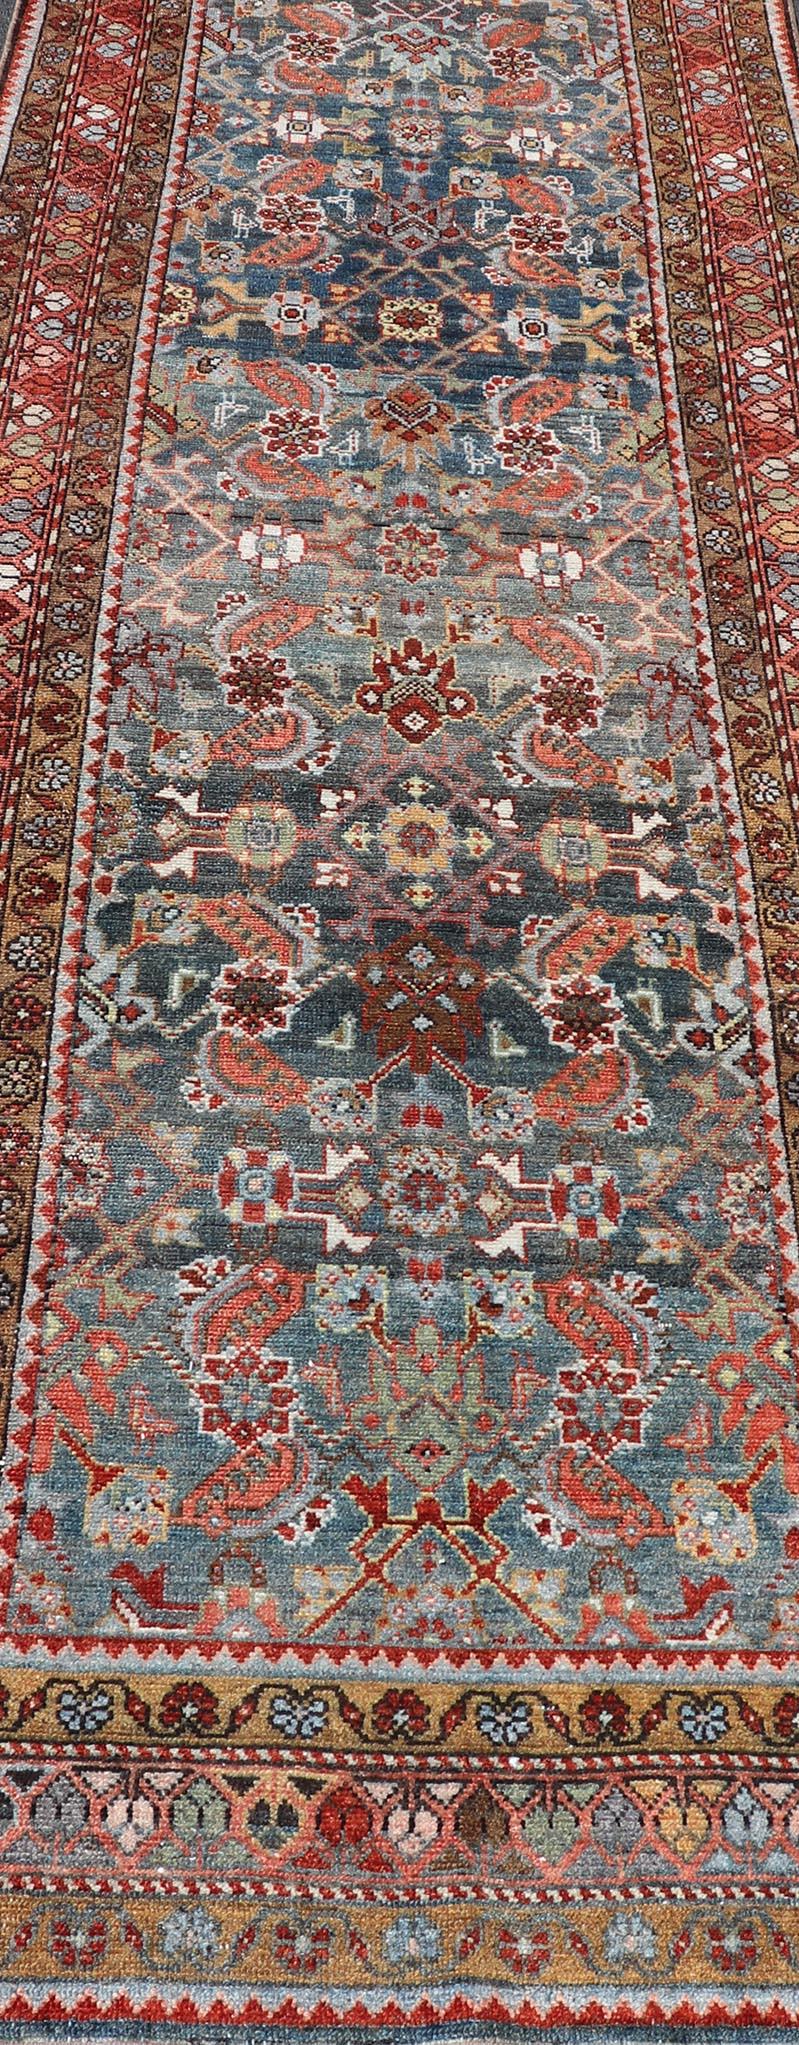 Wool N.W. Persian Antique Runner with Geometric Florals Set on a Blue Field For Sale